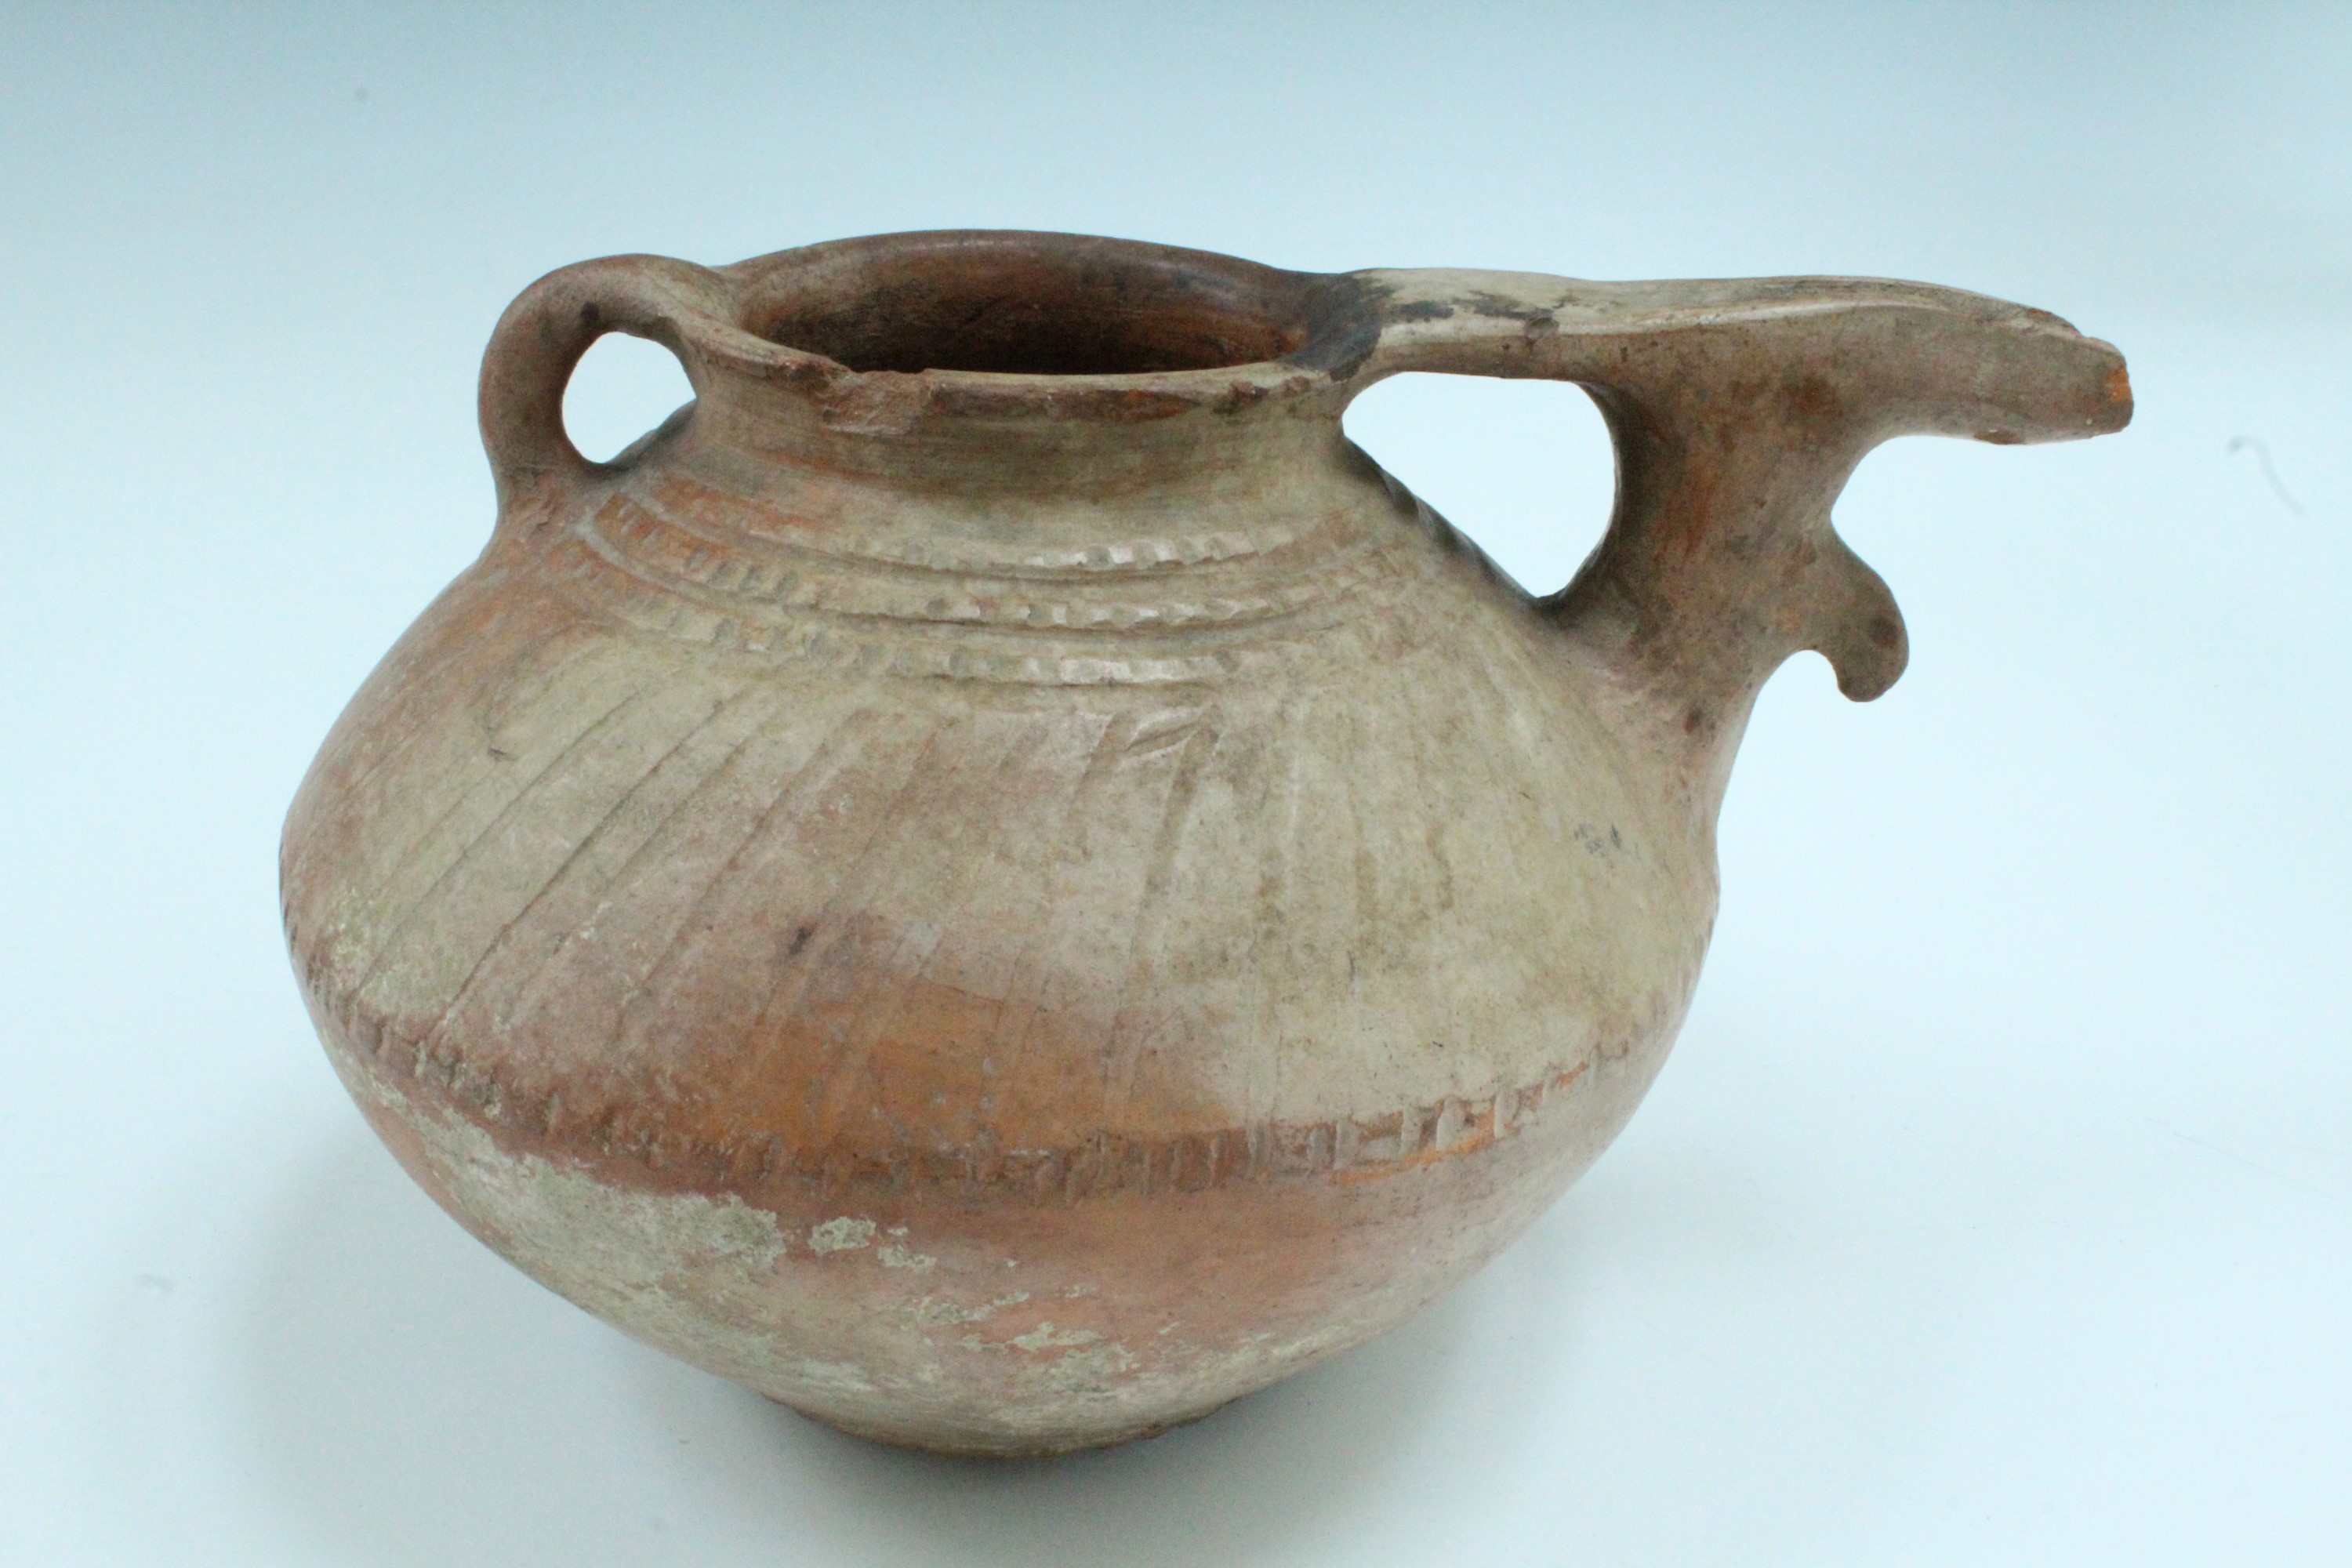 An ancient Luristan earthenware spouted vessel, of lenticular form with bridged spout and opposed